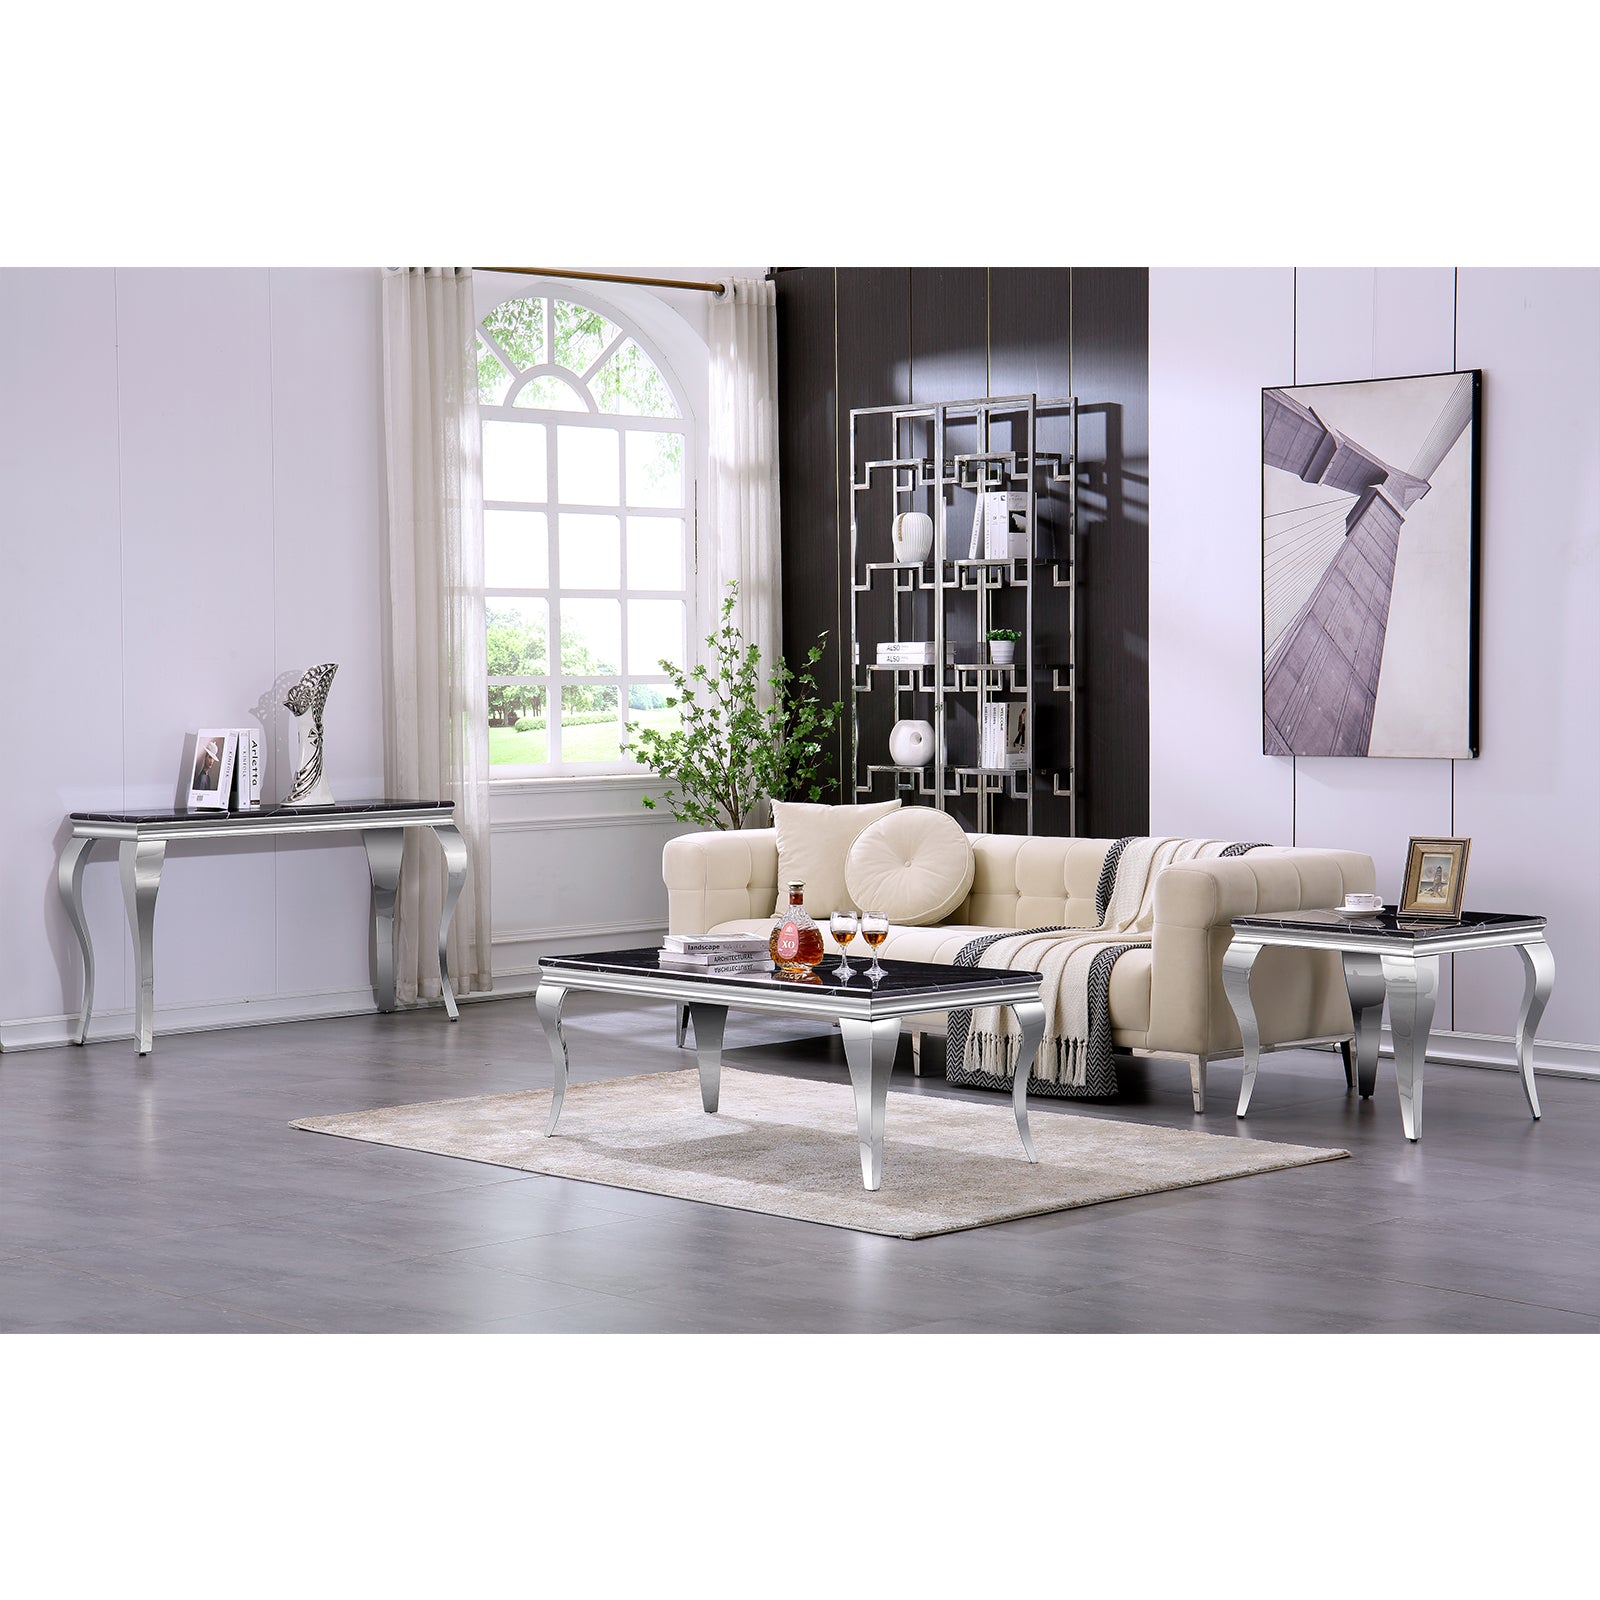 Black End Table with Stainless Steel Legs | E410